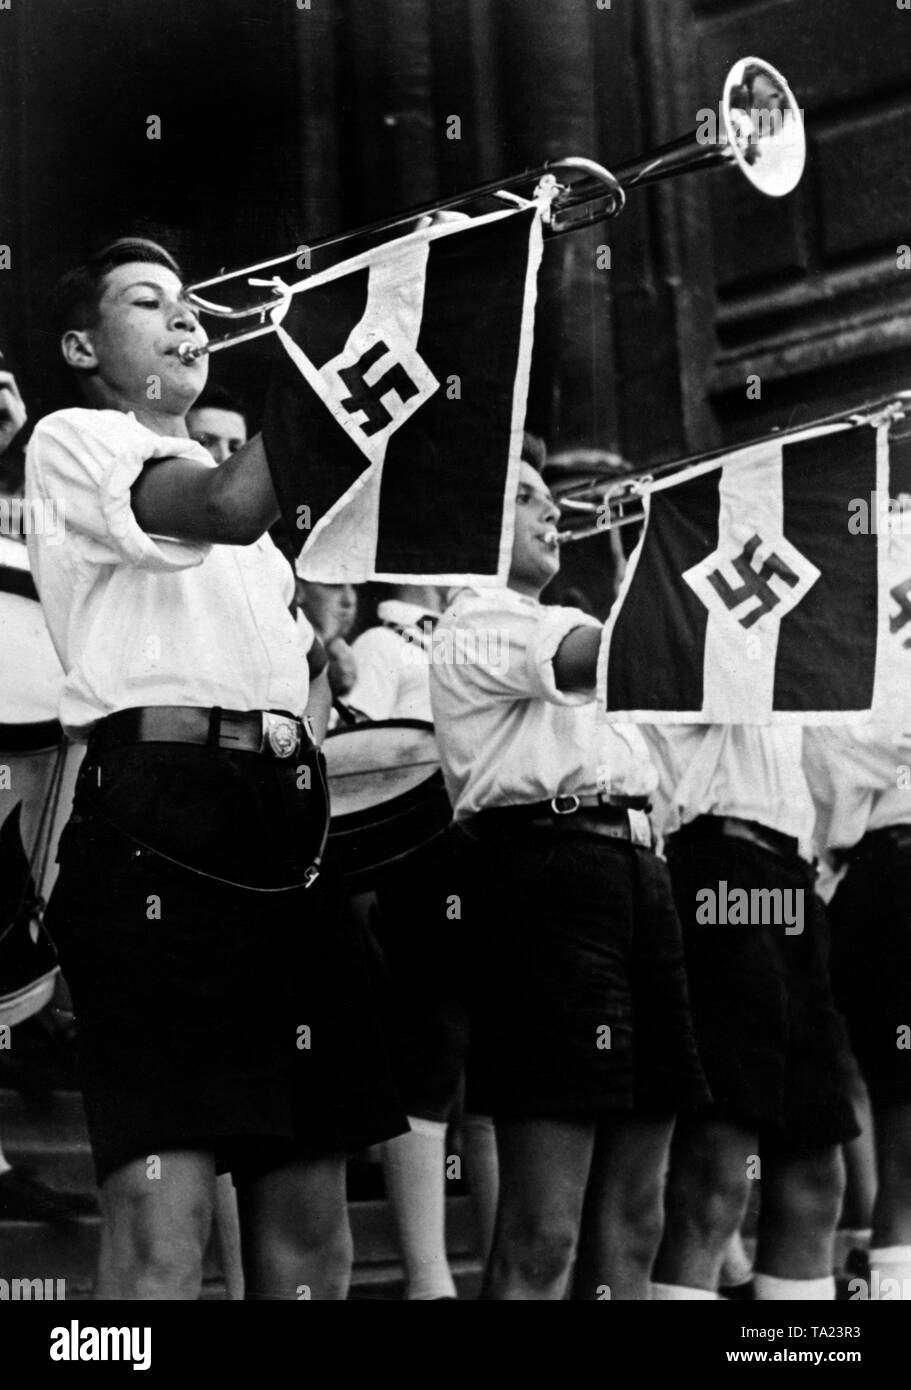 Trumpeters of the Deutsches Jungvolk during the propaganda weeks of the Hitlerjugend (Hitler Youth) right after the Anschluss of Austria in front of the city hall in Vienna. Stock Photo